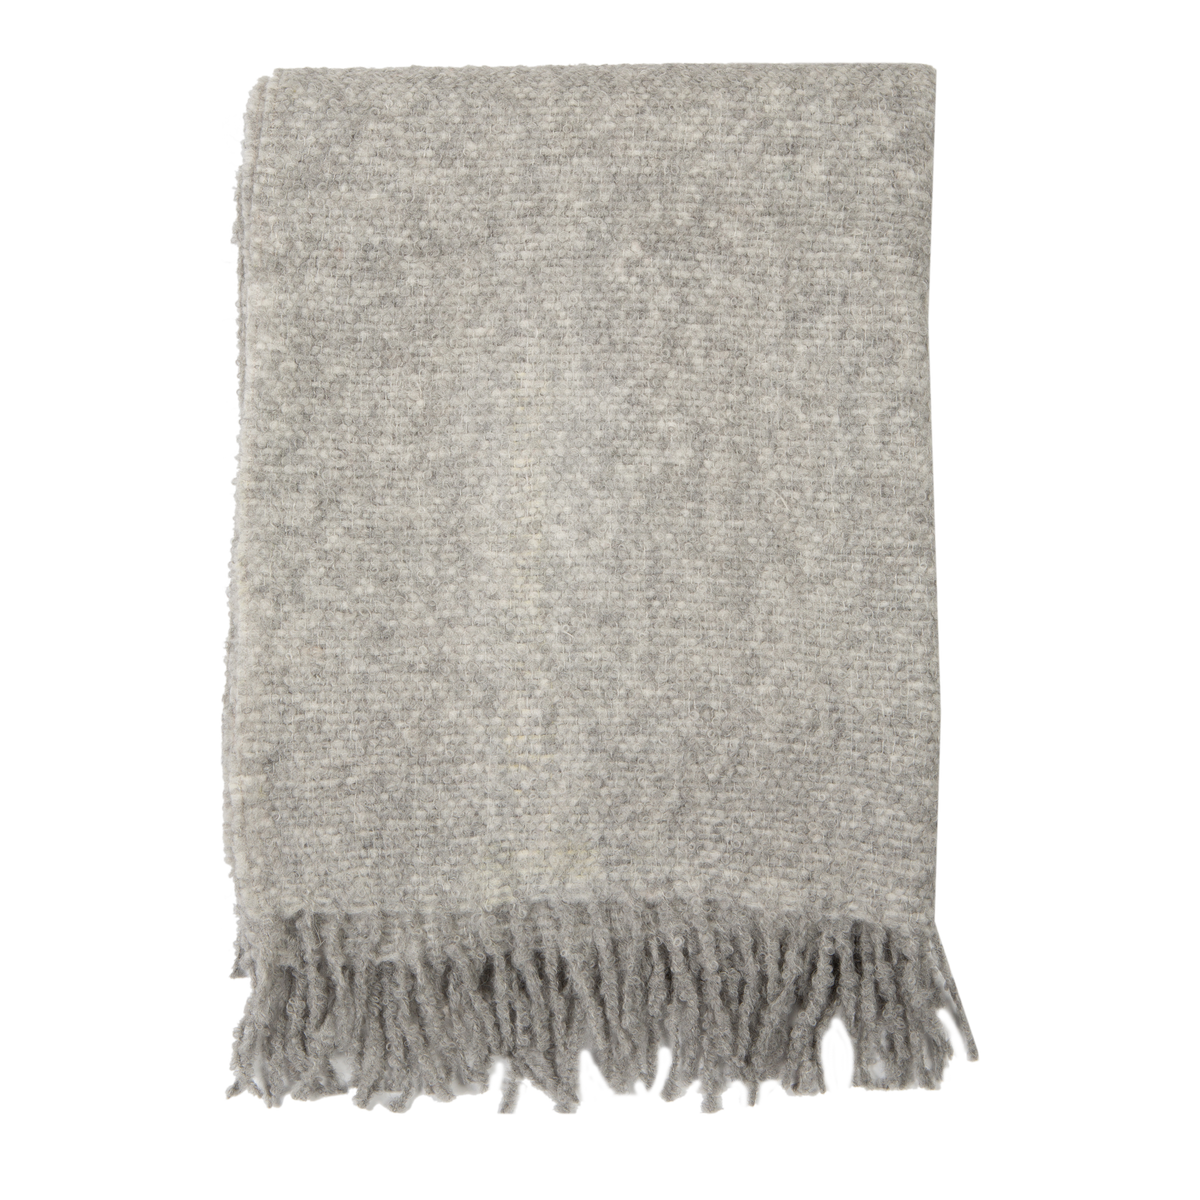 This textured Alpaca Boucle Throw is specially woven by artisans in Peru.